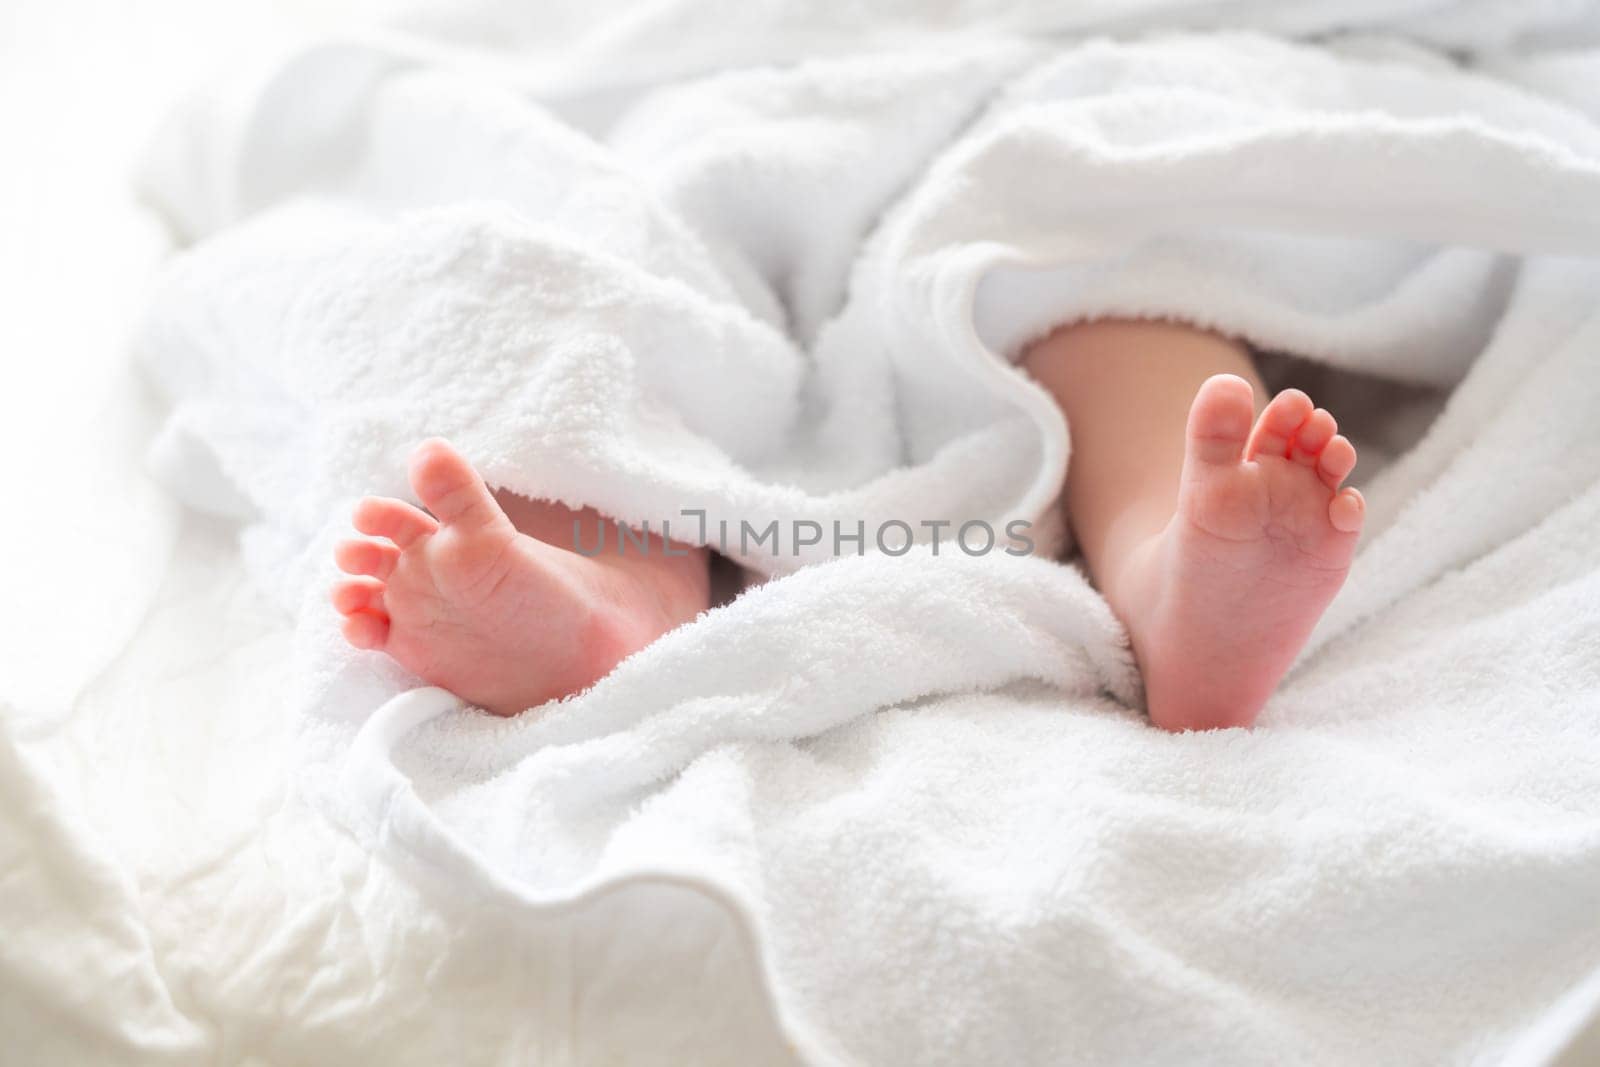 Newborn baby's feet delicately peeking from beneath a soft white towel capturing the essence of post-bath calmness and purity